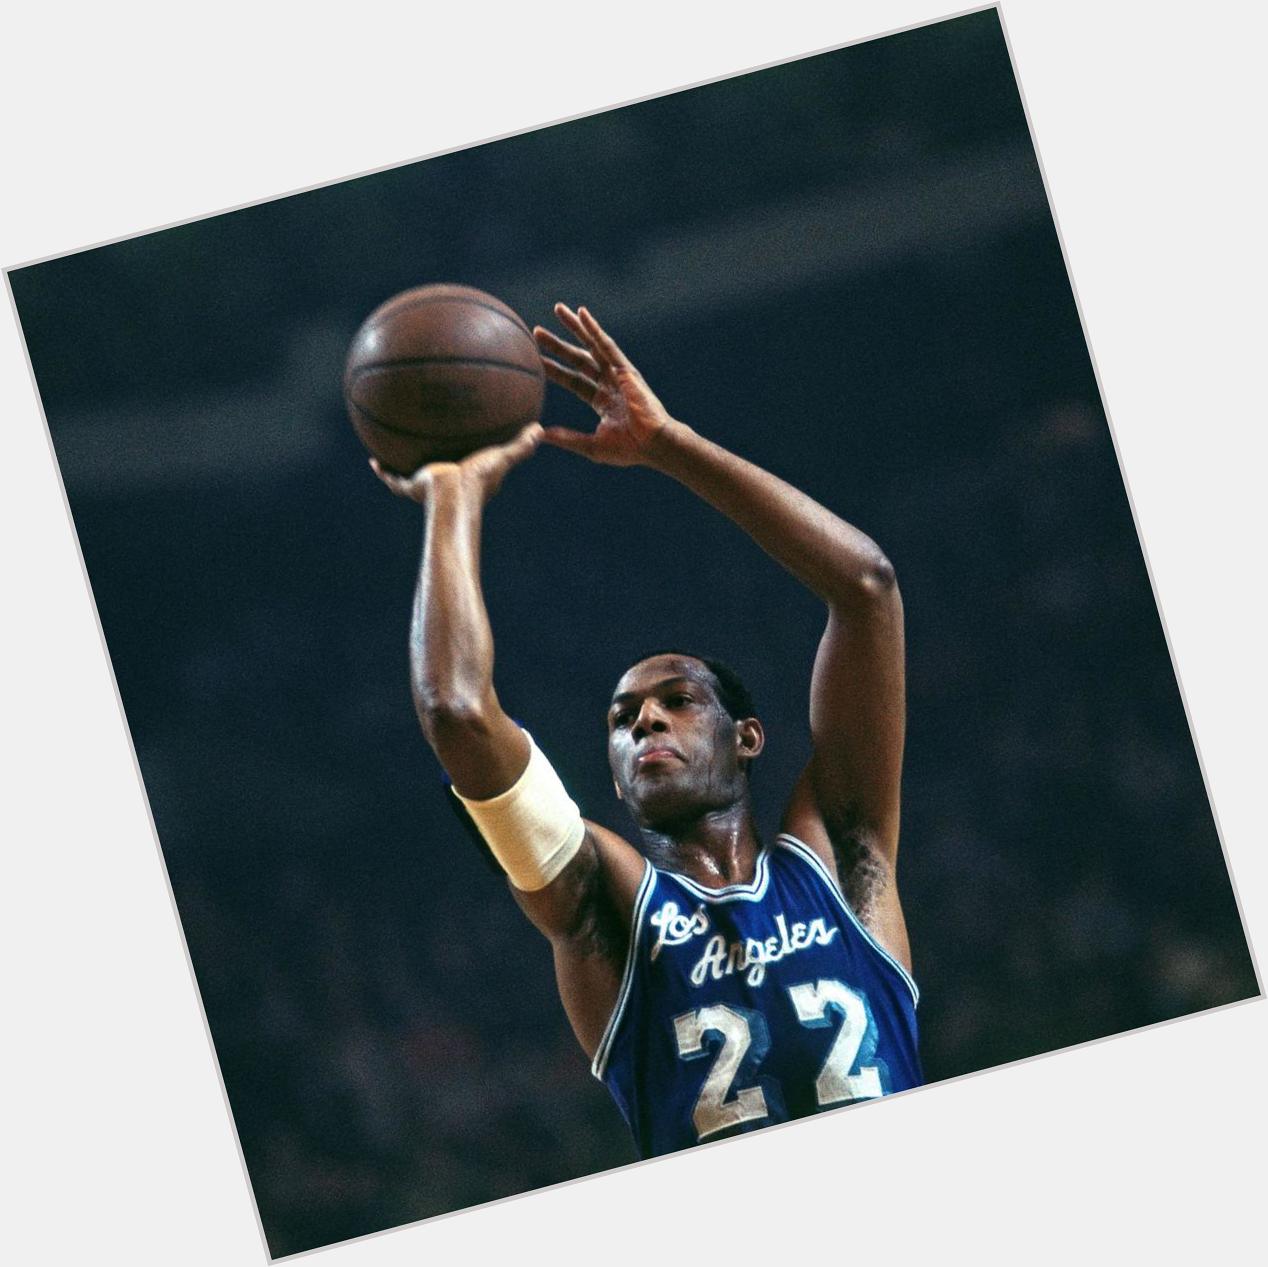  : Happy Birthday to 11-time All-Star Elgin Baylor! The legend turns 81 today. 